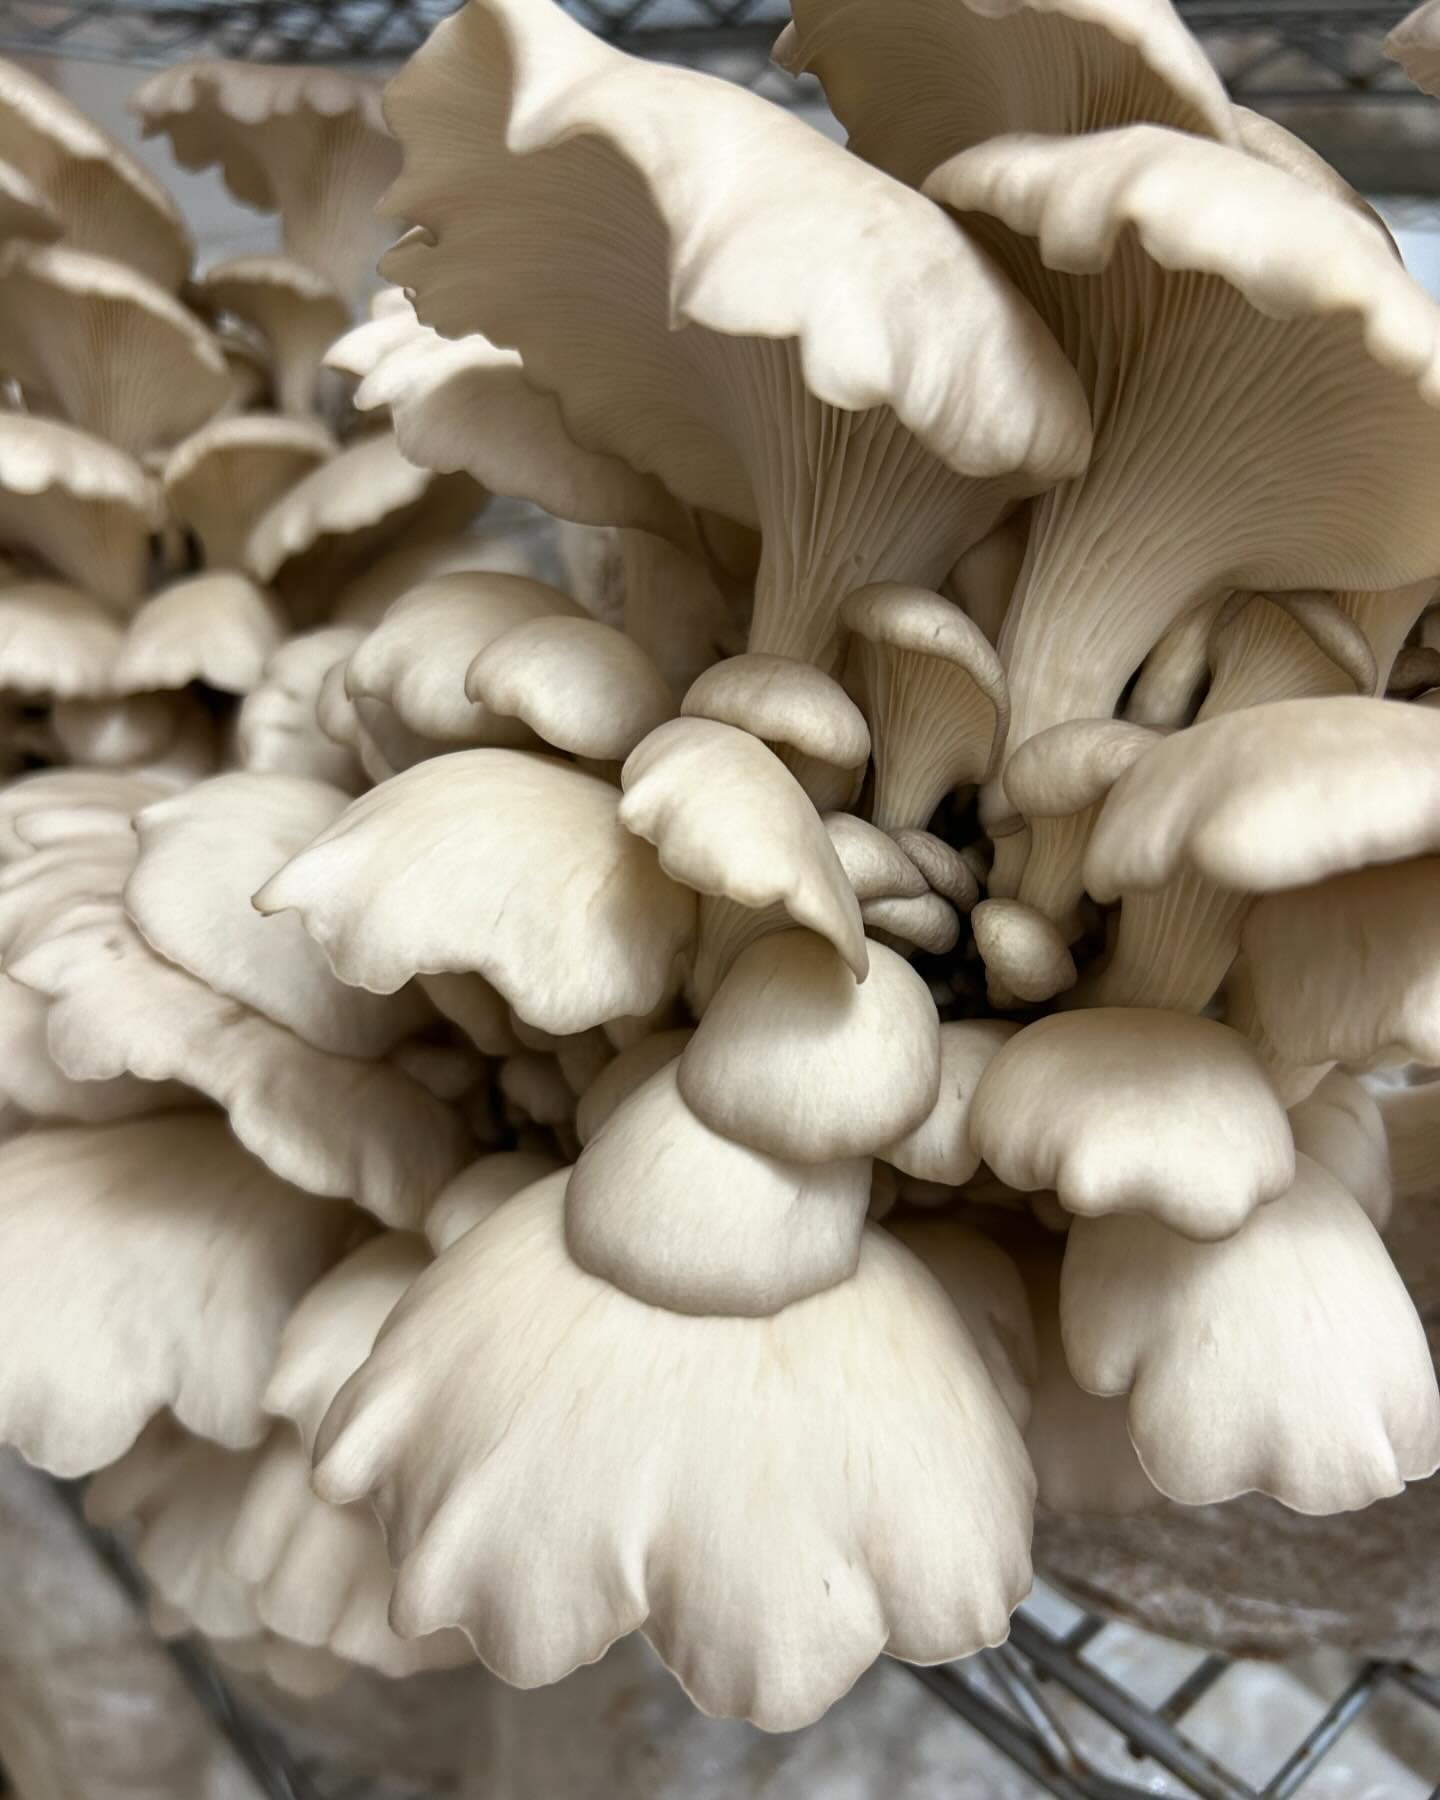 Welcomed an old friend back to the grow room this week - the Rocky Top Oyster mushroom. 
Beautiful clusters of mushrooms that develop a ruffled edge as they mature. 
Subscribers receive some Rocky as well as Comb Tooth this week. 
More new varieties 